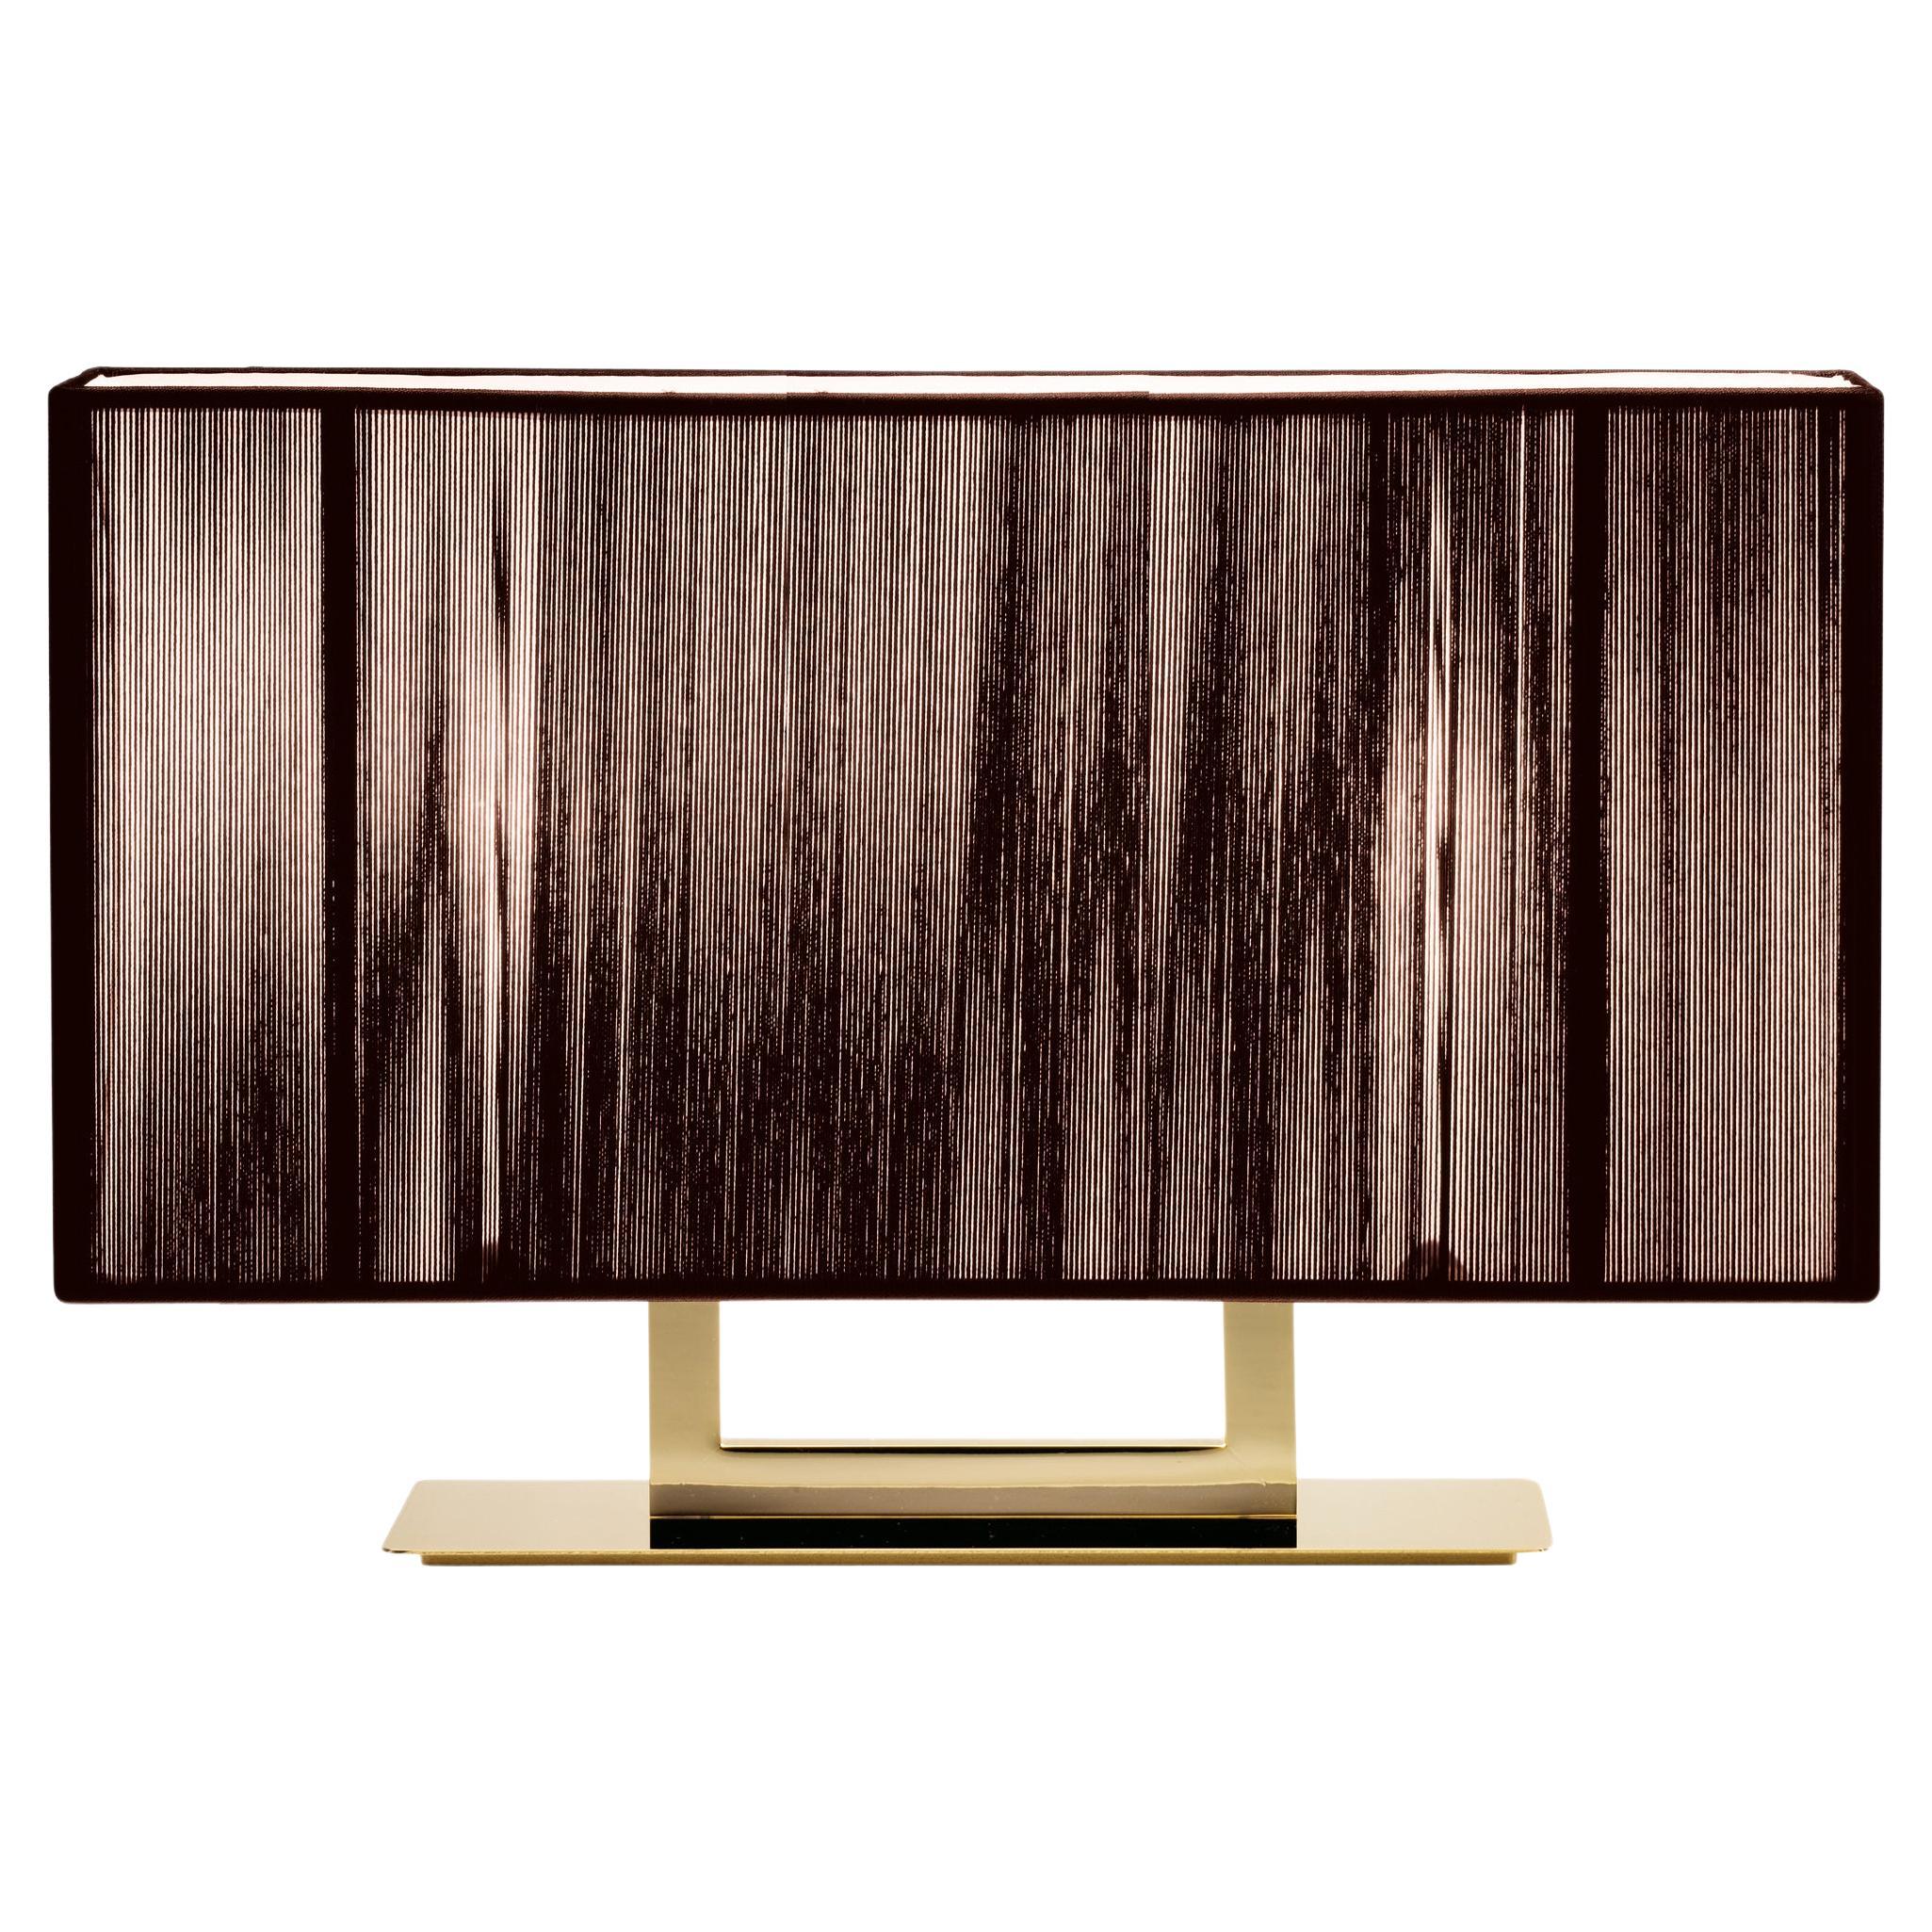 Axolight Clavius Large Table Lamp in Tobacco Lampshade with Gold Finish